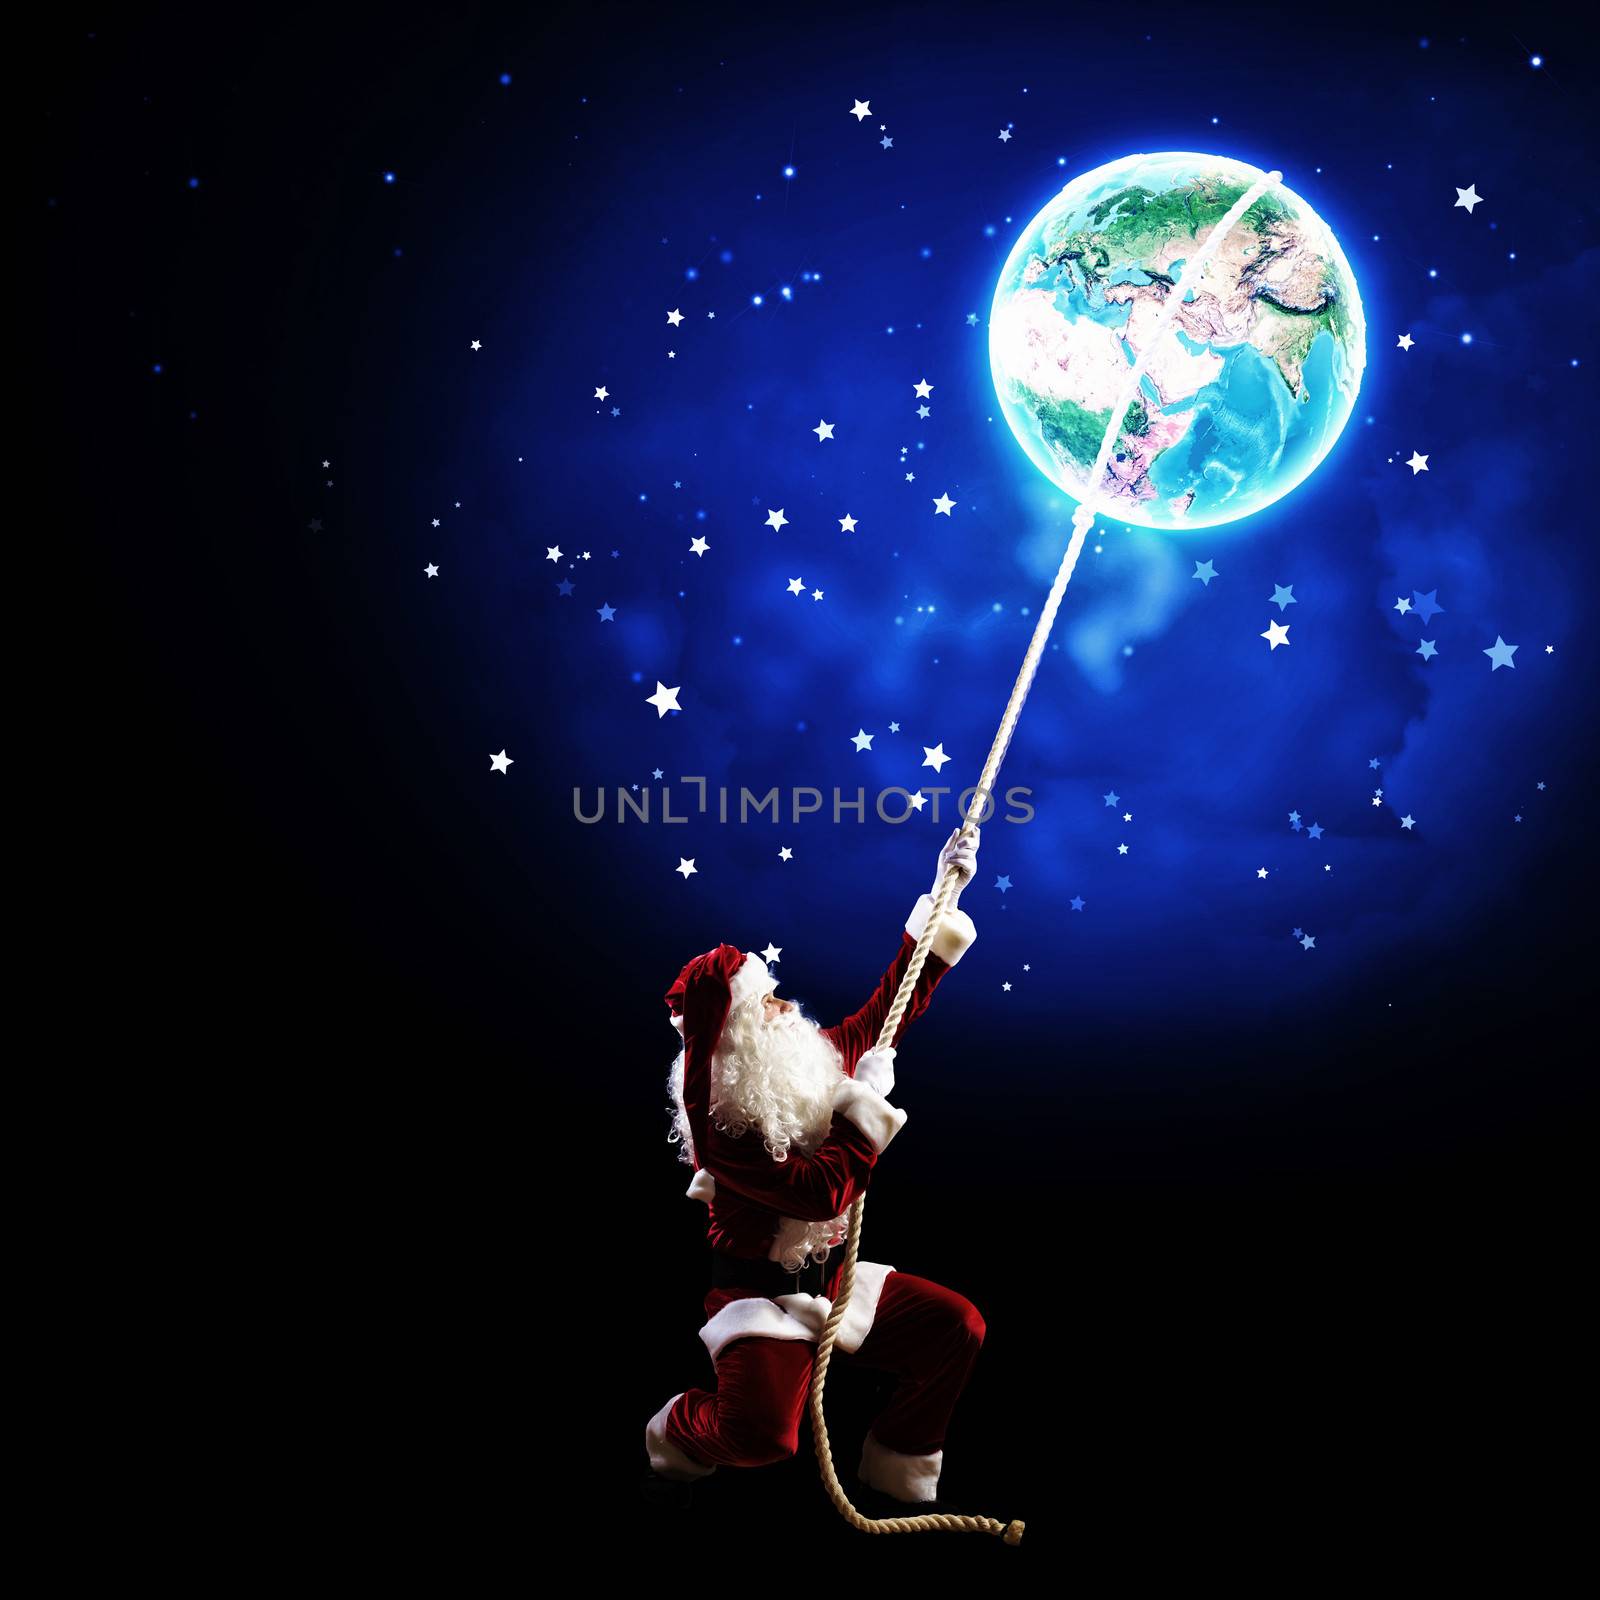 Image of Santa Claus in red costume with Earth planet